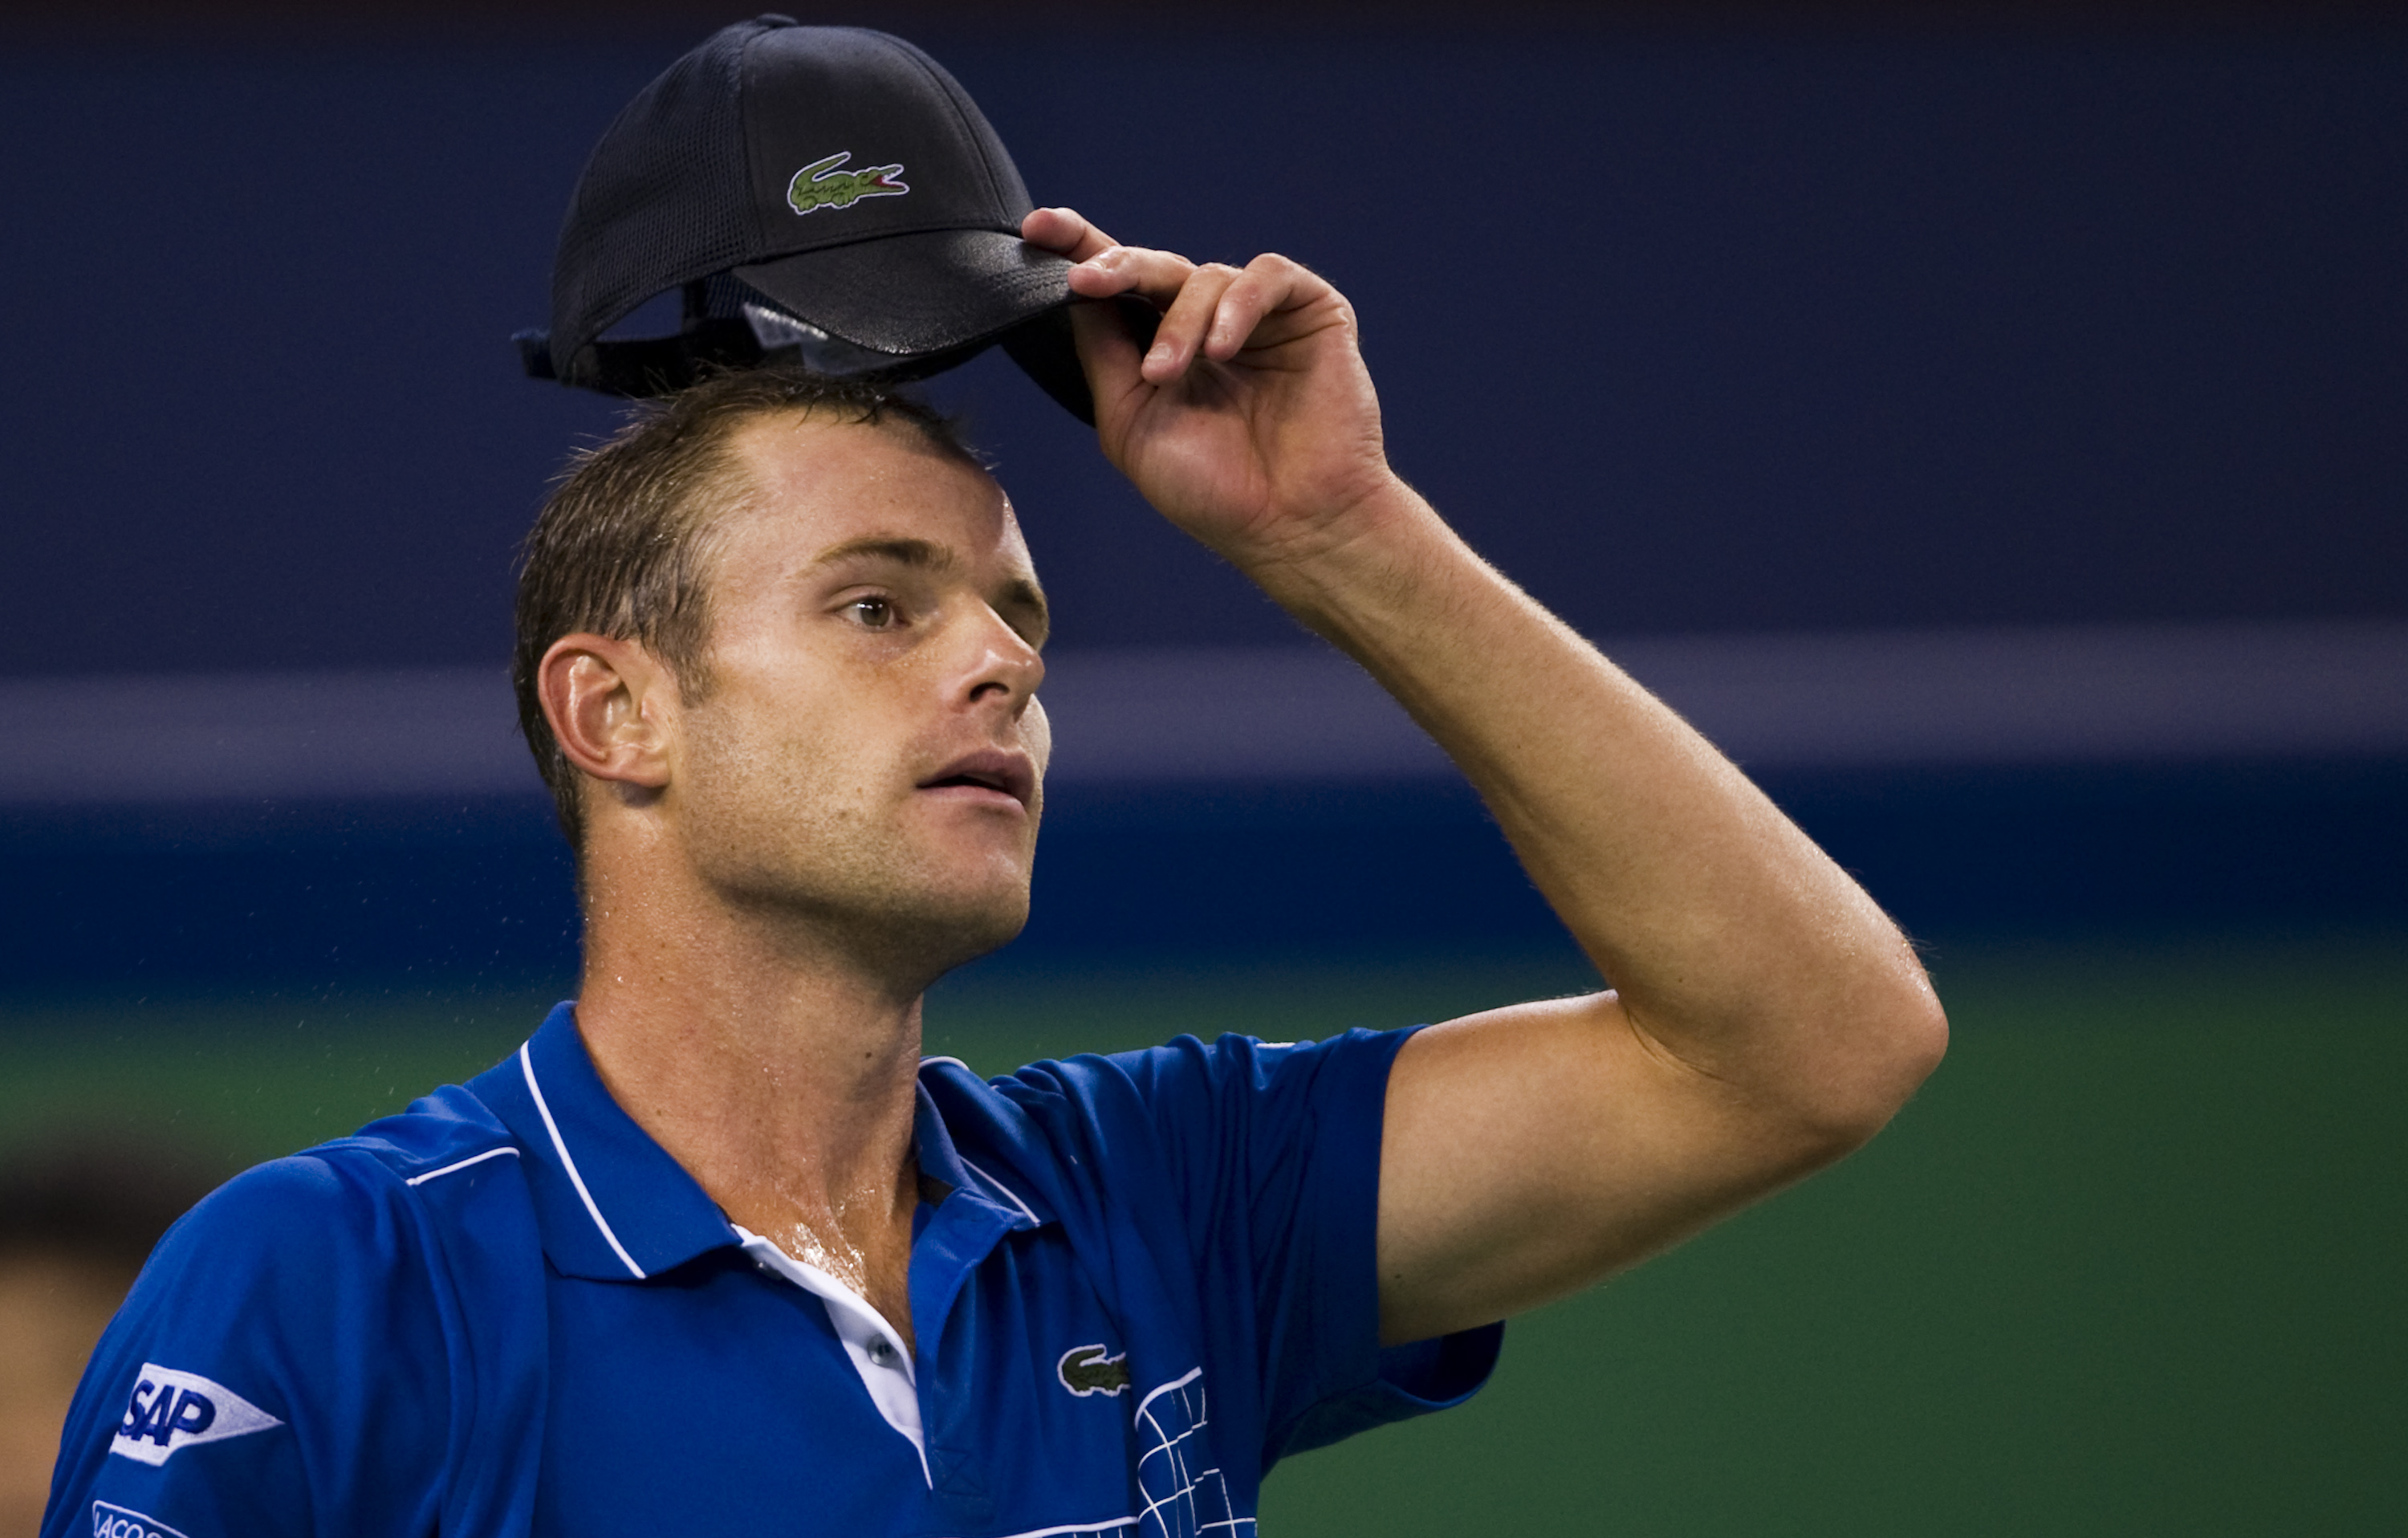 SHANGHAI, CHINA - OCTOBER 12: Andy Roddick of USA adjust his cap on his match against Philipp Kohlschreiber of Germany during day two of the 2010 Shanghai Rolex Masters at the Shanghai Qi Zhong Tennis Center on October 12, 2010 in Shanghai, China.  (Photo